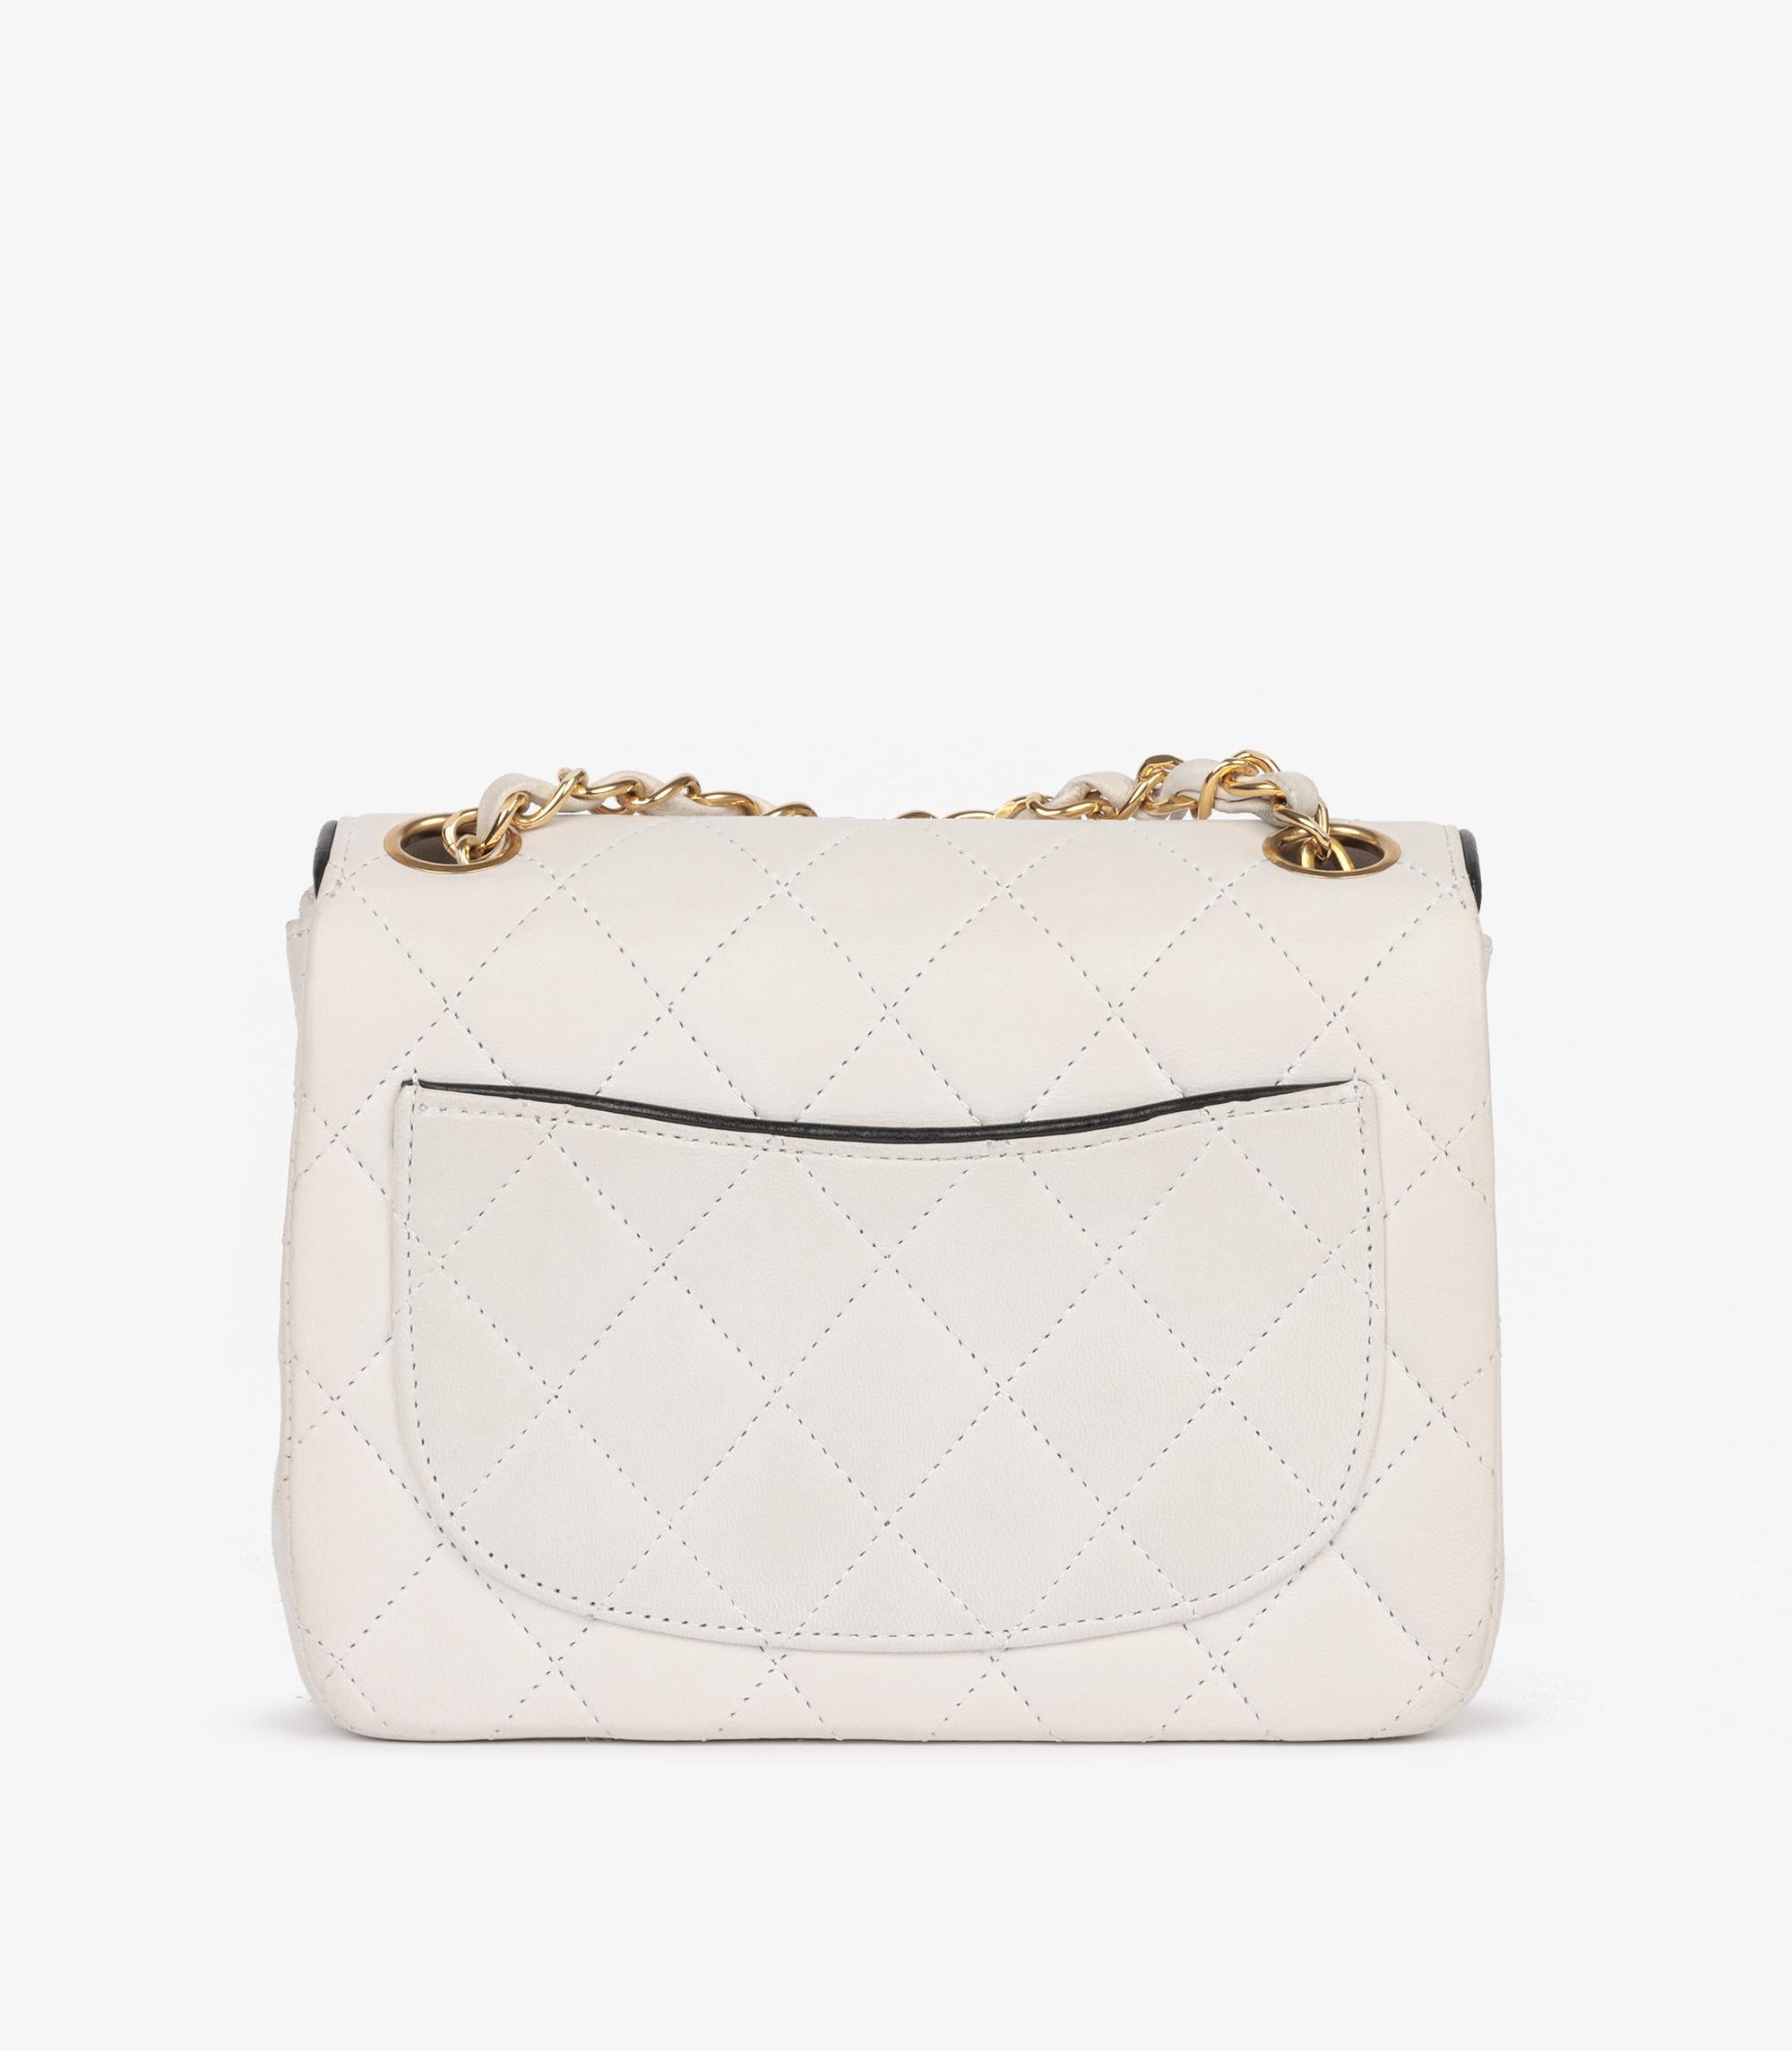 Chanel White Quilted Lambskin With Black Trim Vintage Square Mini Flap Bag 1